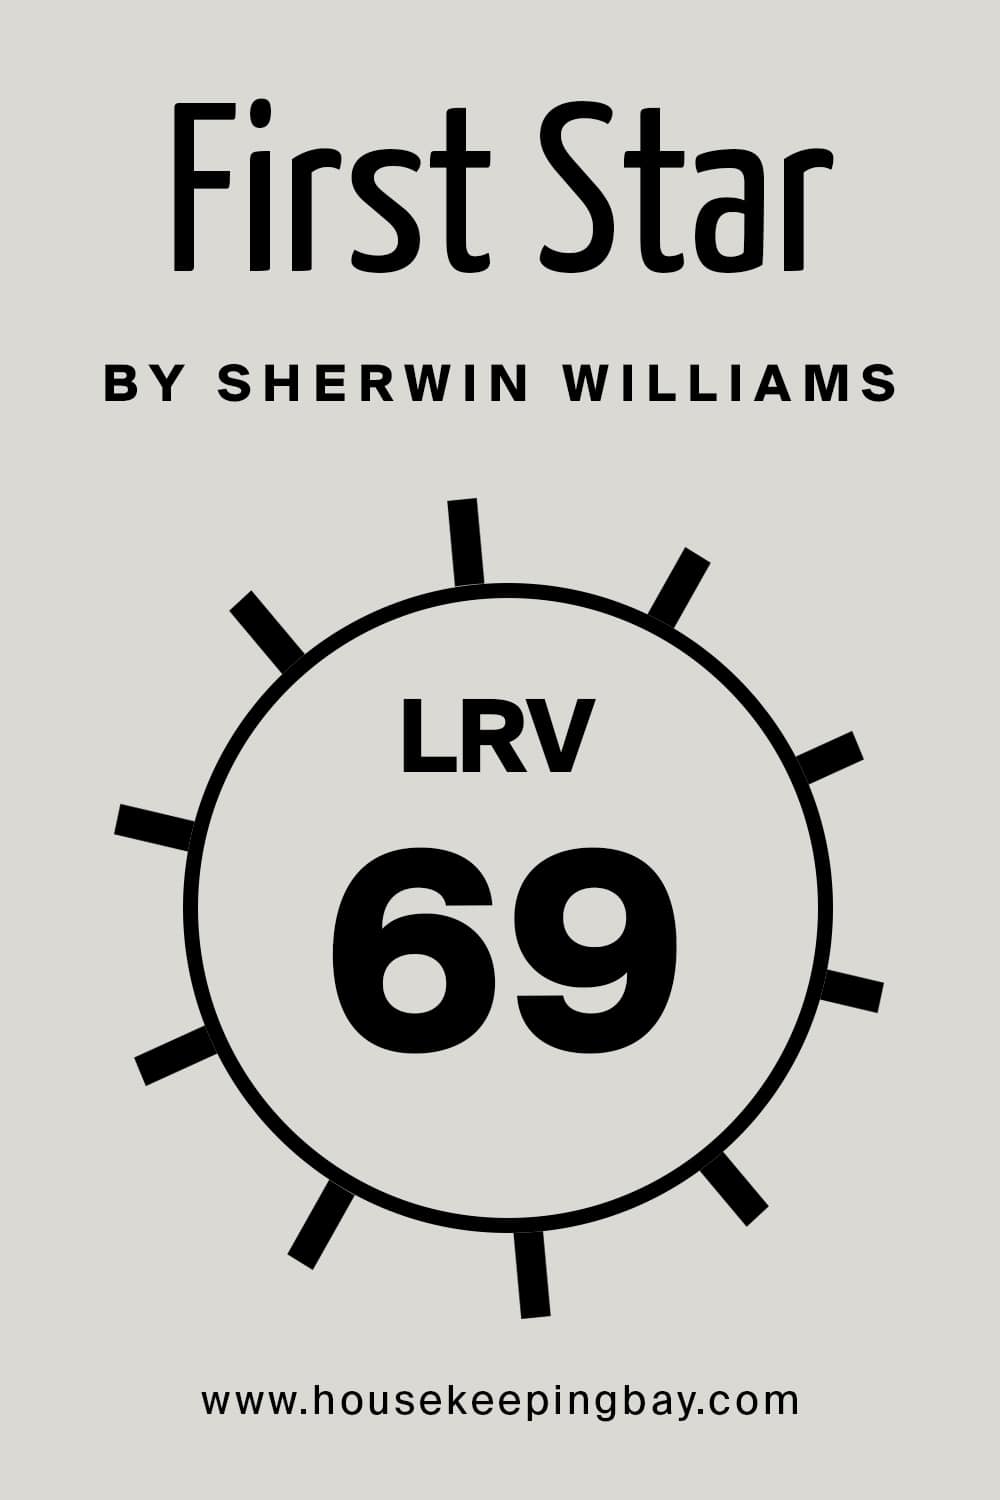 First Star by Sherwin Williams. LRV – 69